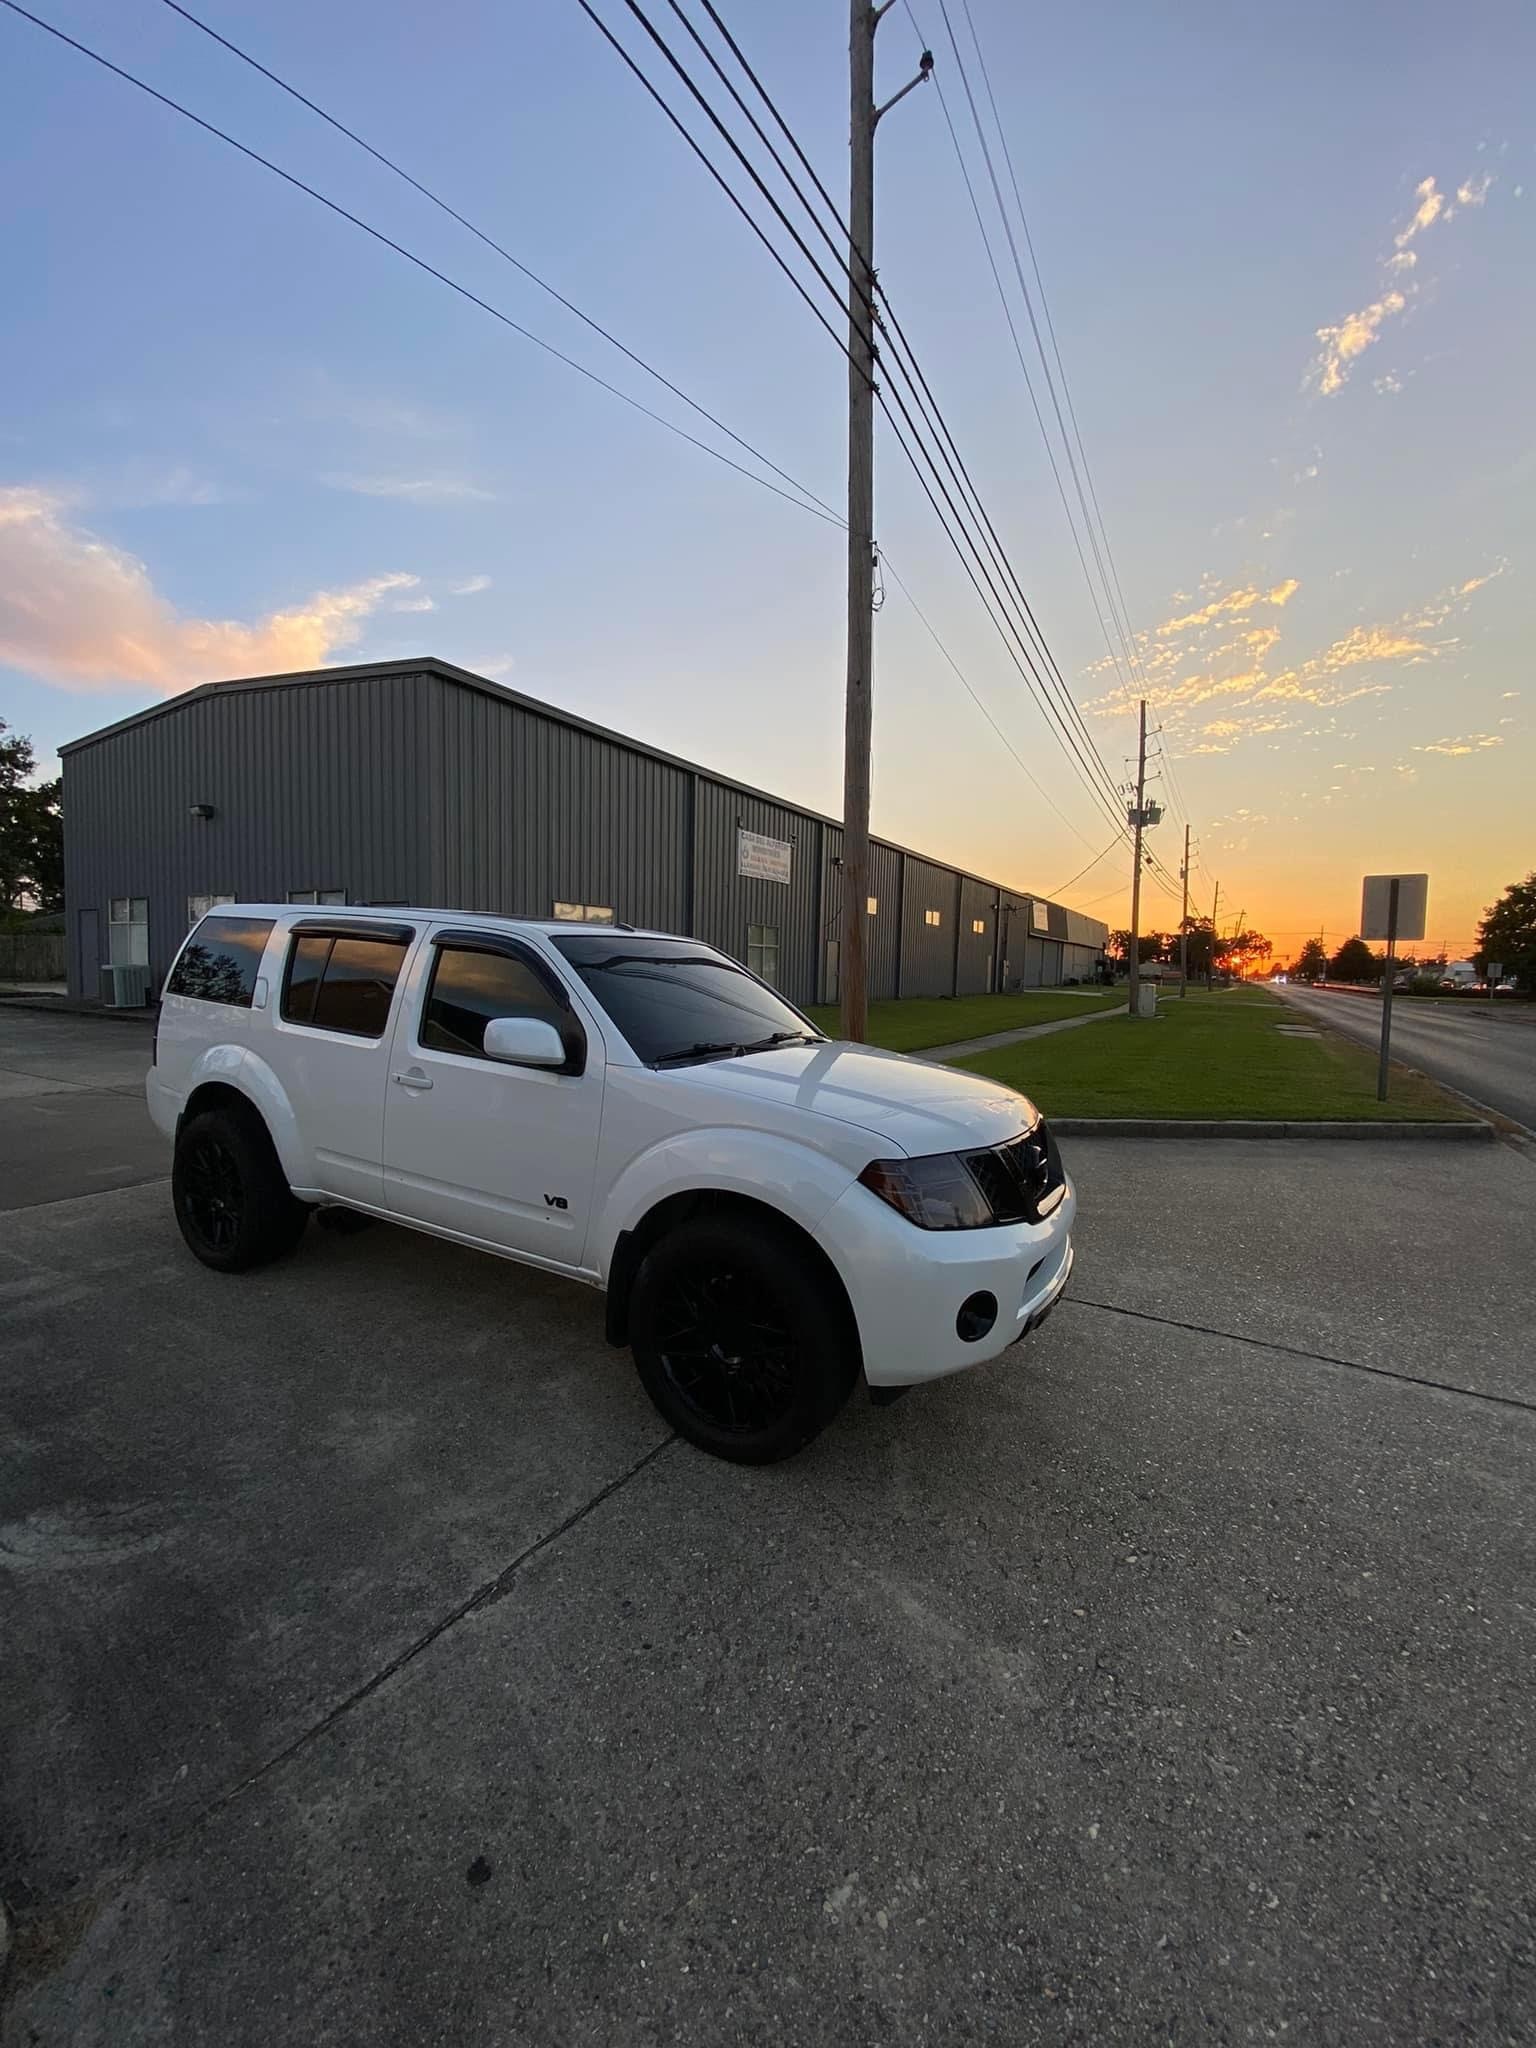 2008 pearl white  Nissan Pathfinder V8 LE RWD picture, mods, upgrades